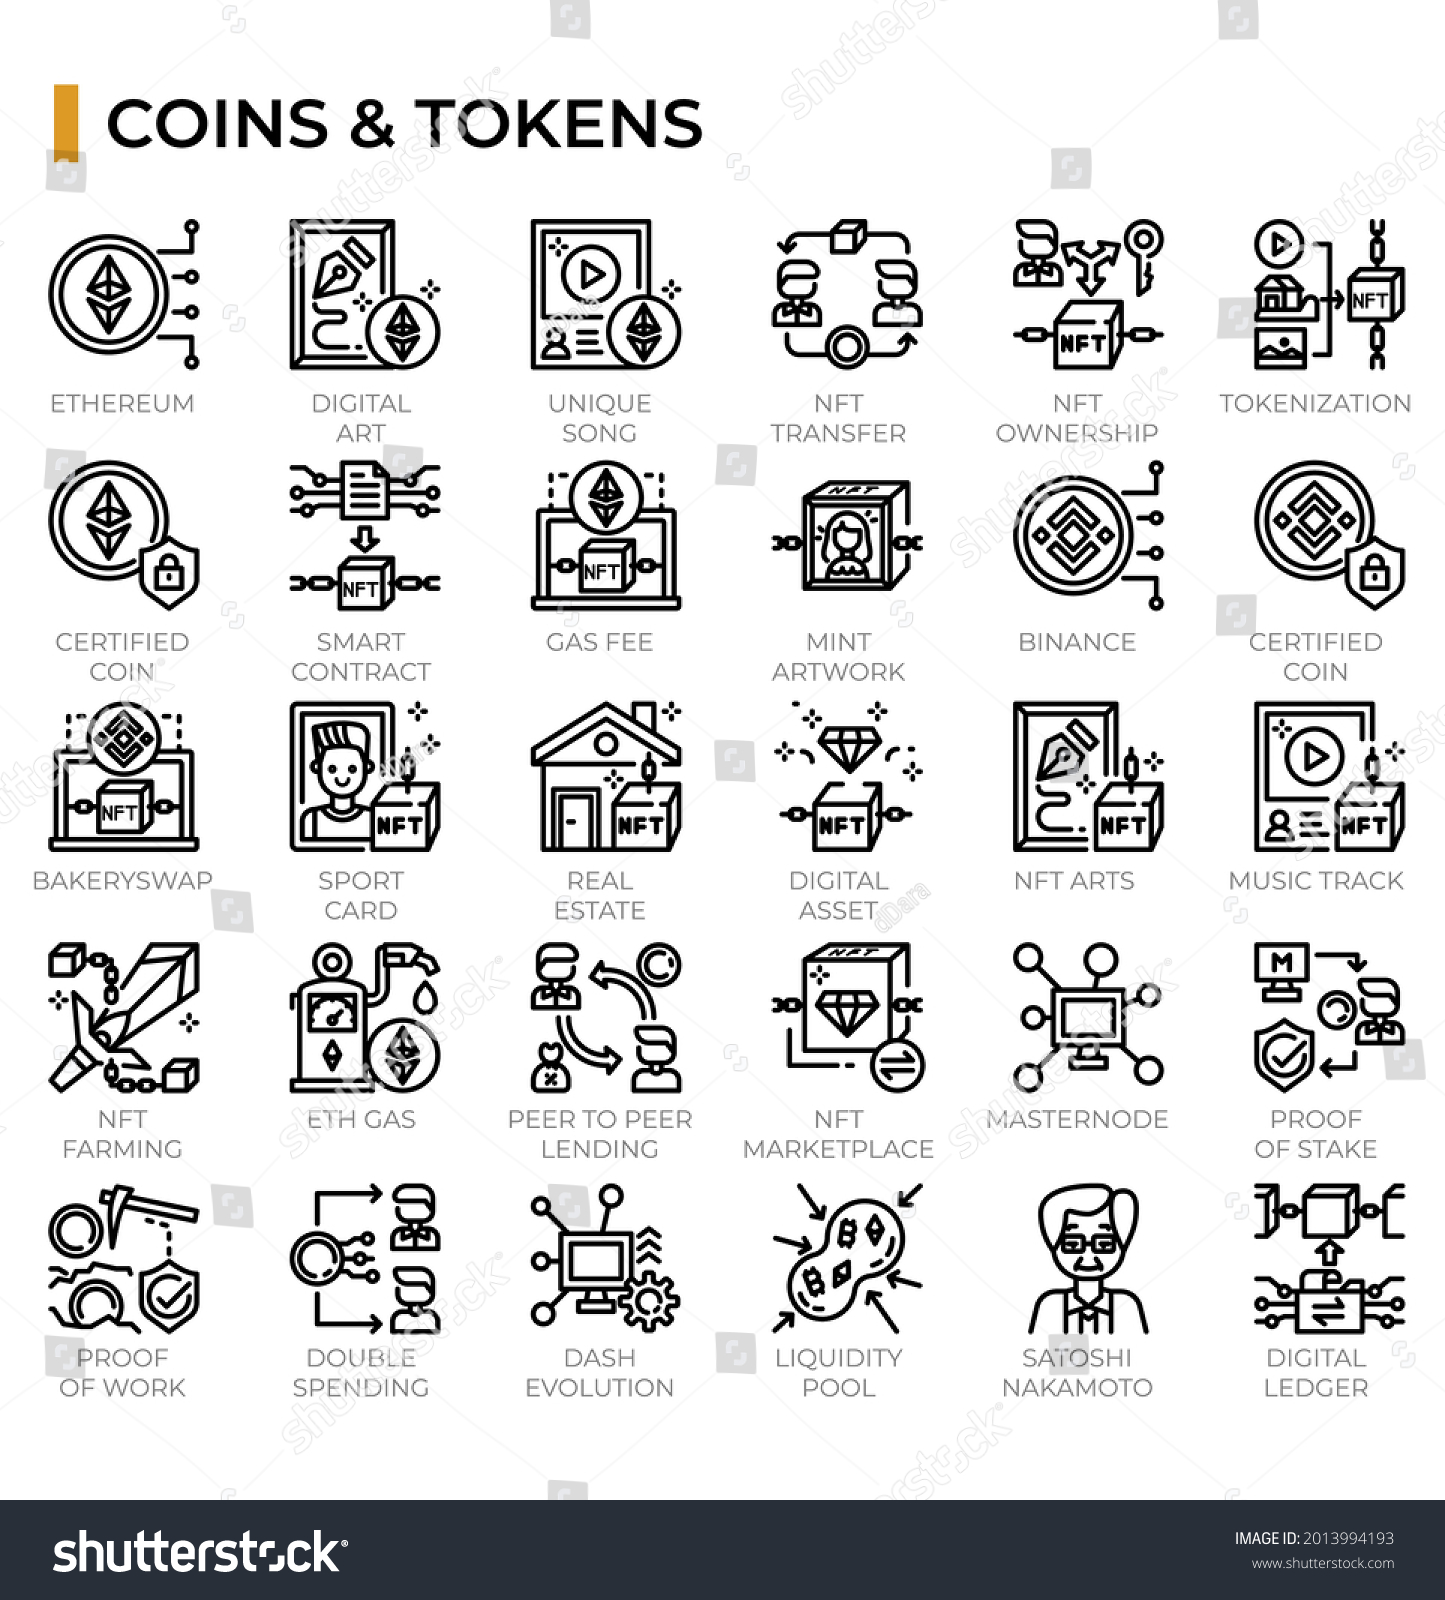 SVG of Non-fungible tokens and cryptocurrency icon set for cryptocurrency topics, education website, presentation, book. svg